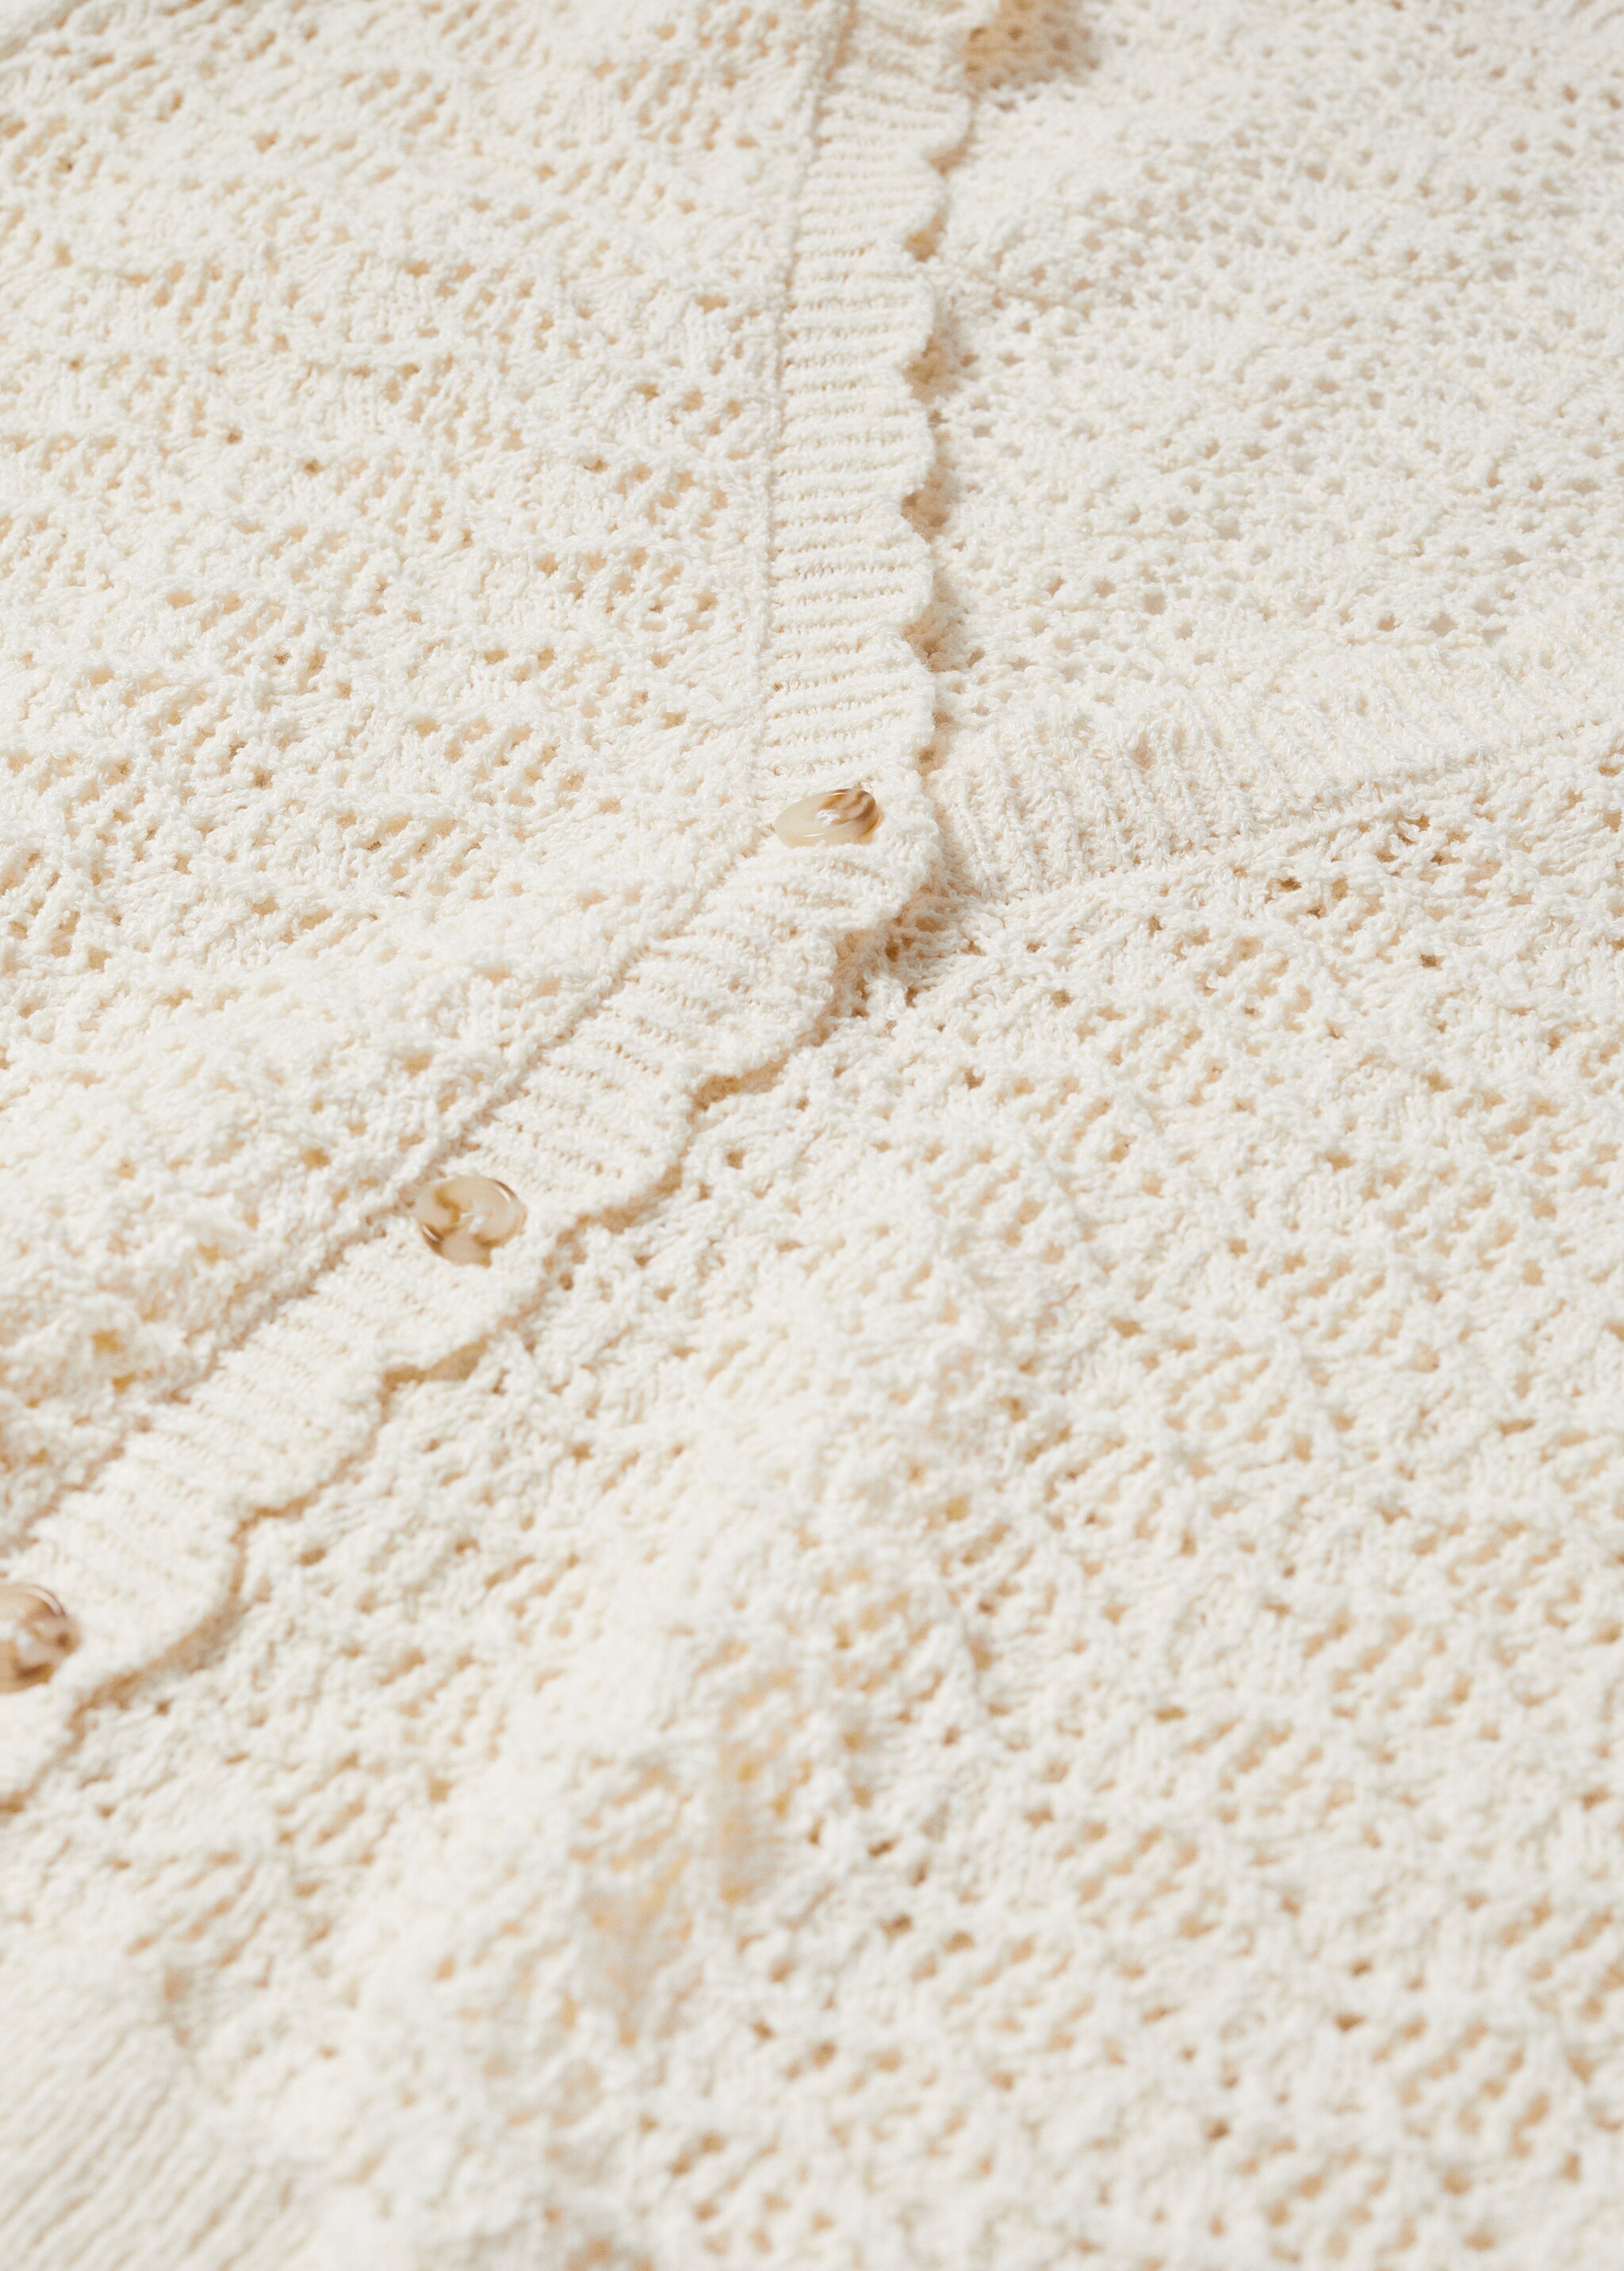 Openwork cardigan with scalloped edges - Details of the article 8